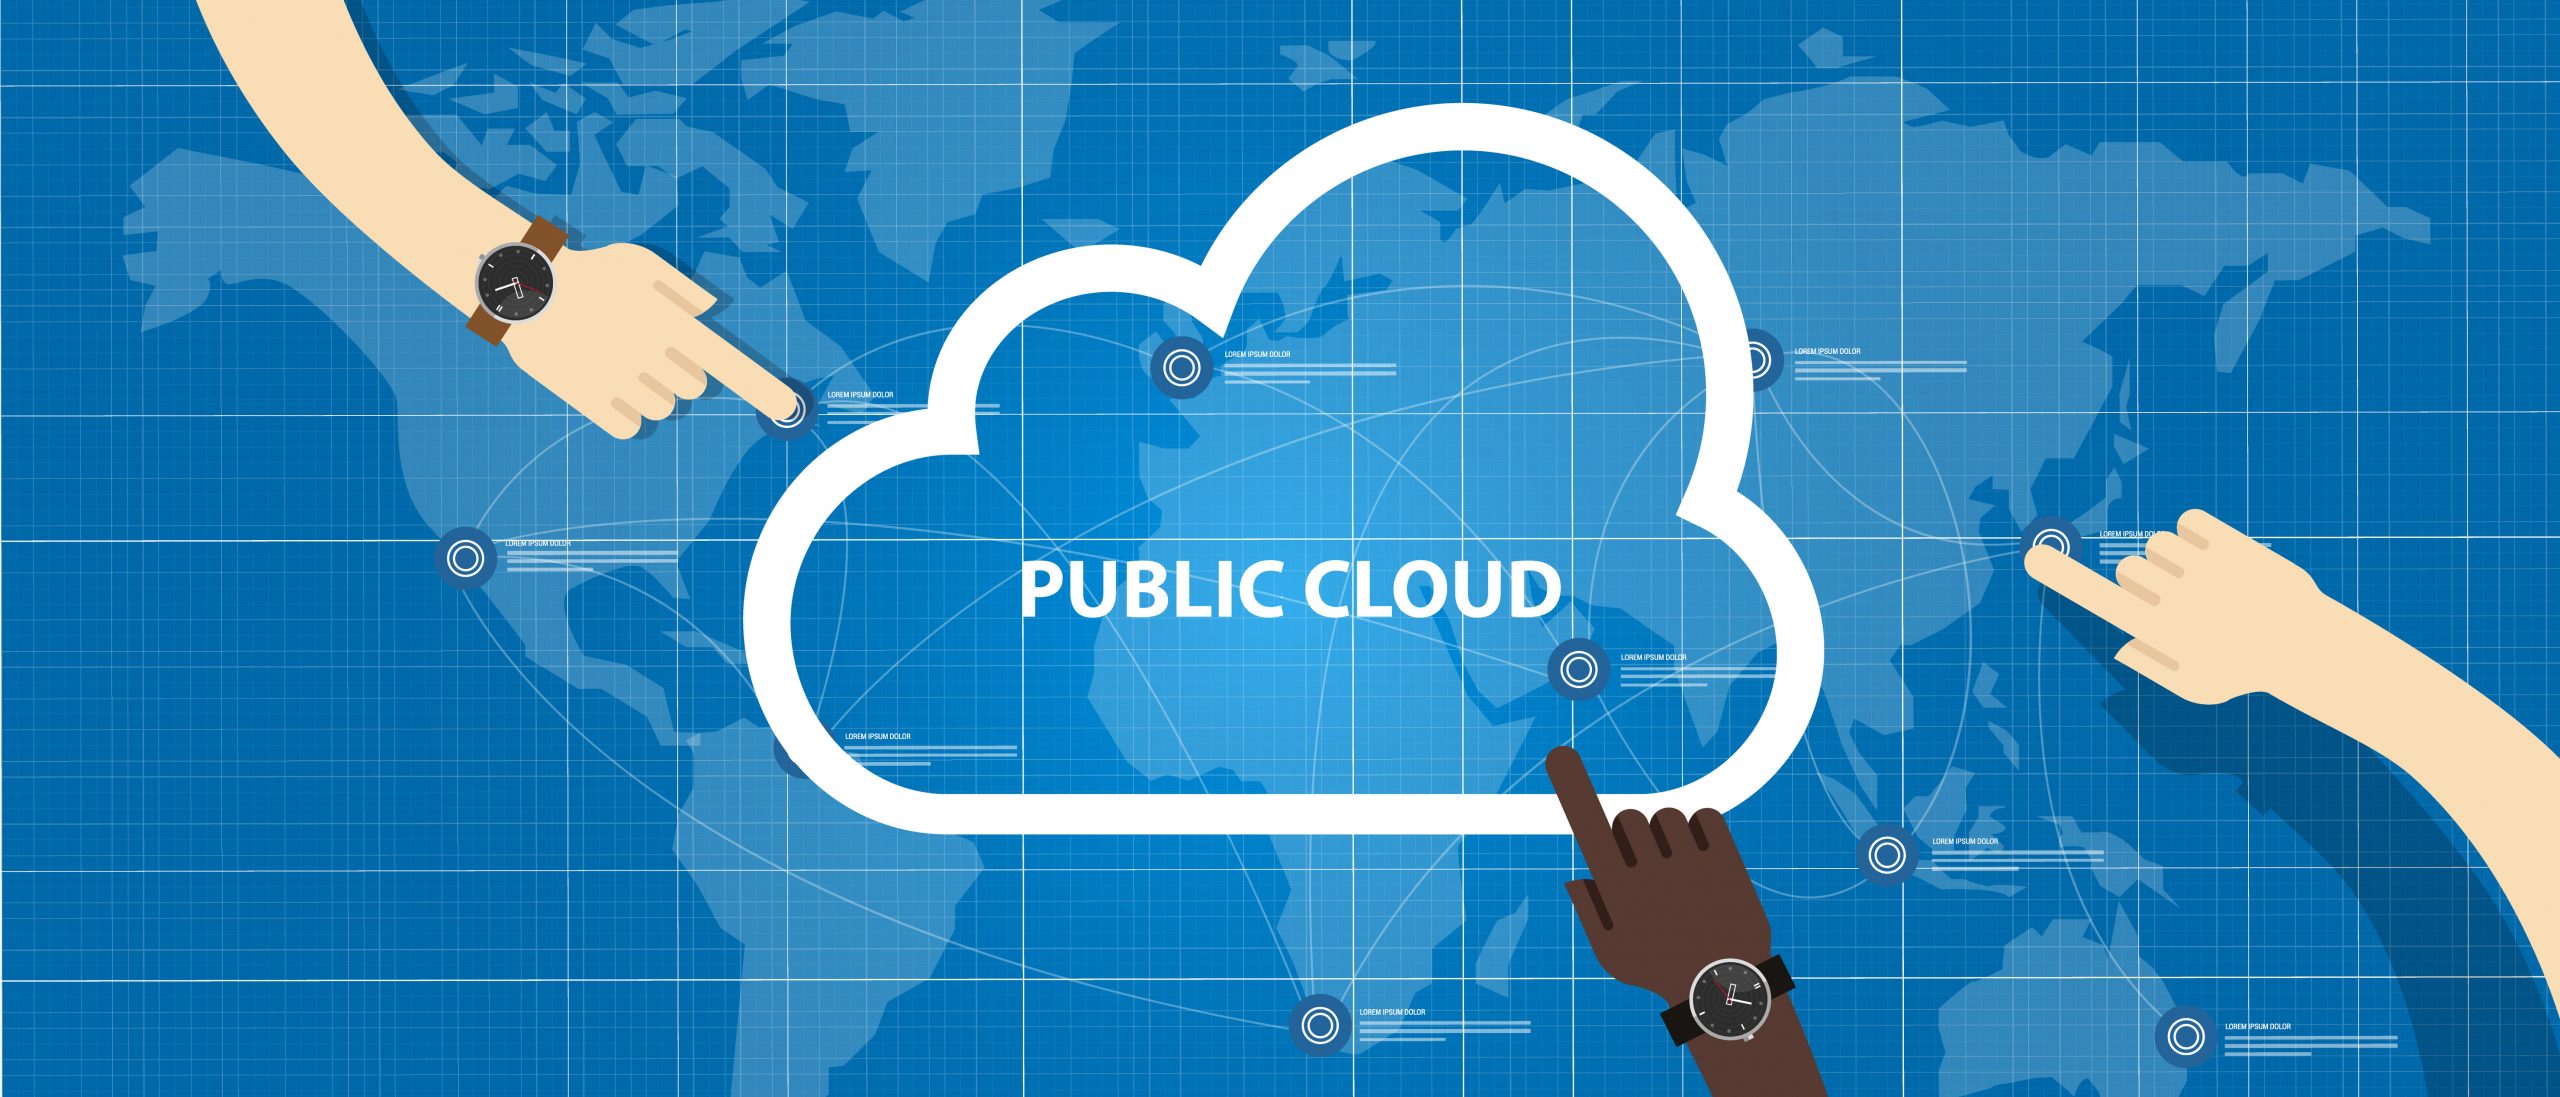 Graphic illustration showing multiple hands interacting with a stylized cloud labeled 'PUBLIC CLOUD' against a digital world map background, symbolizing global connectivity and cloud computing services.